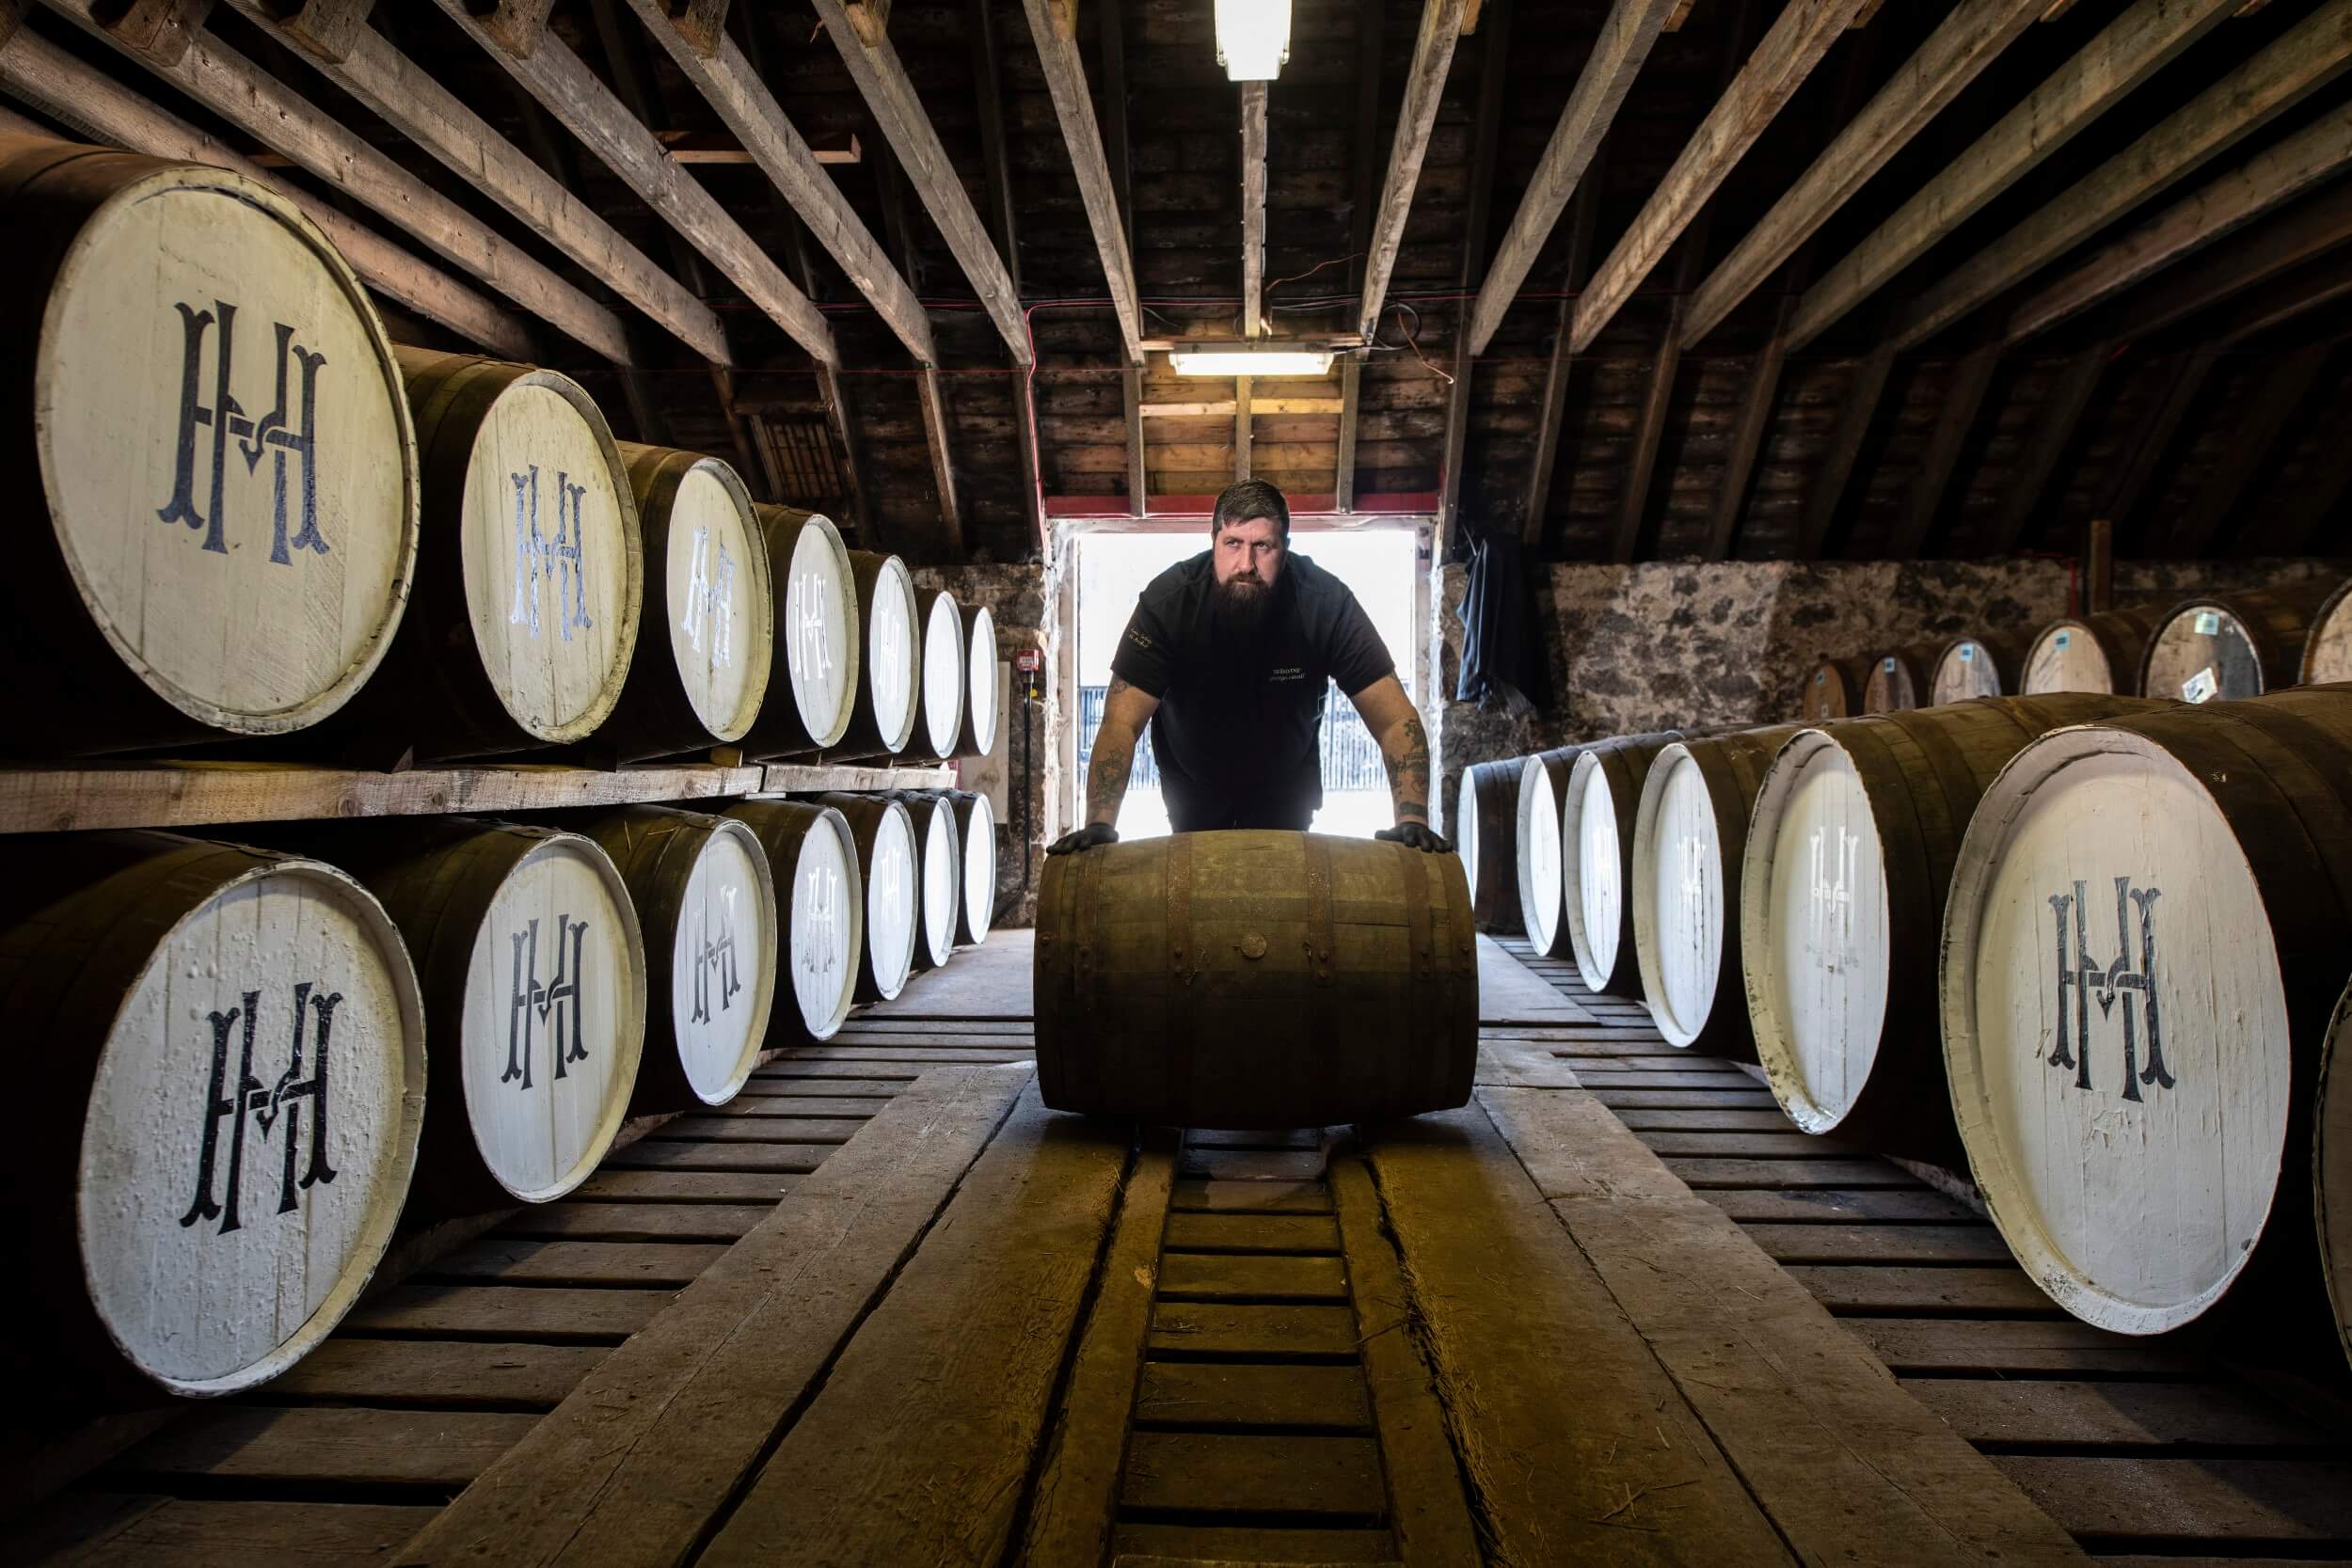 The whisky maker rolling a barrel into a storage cellar.